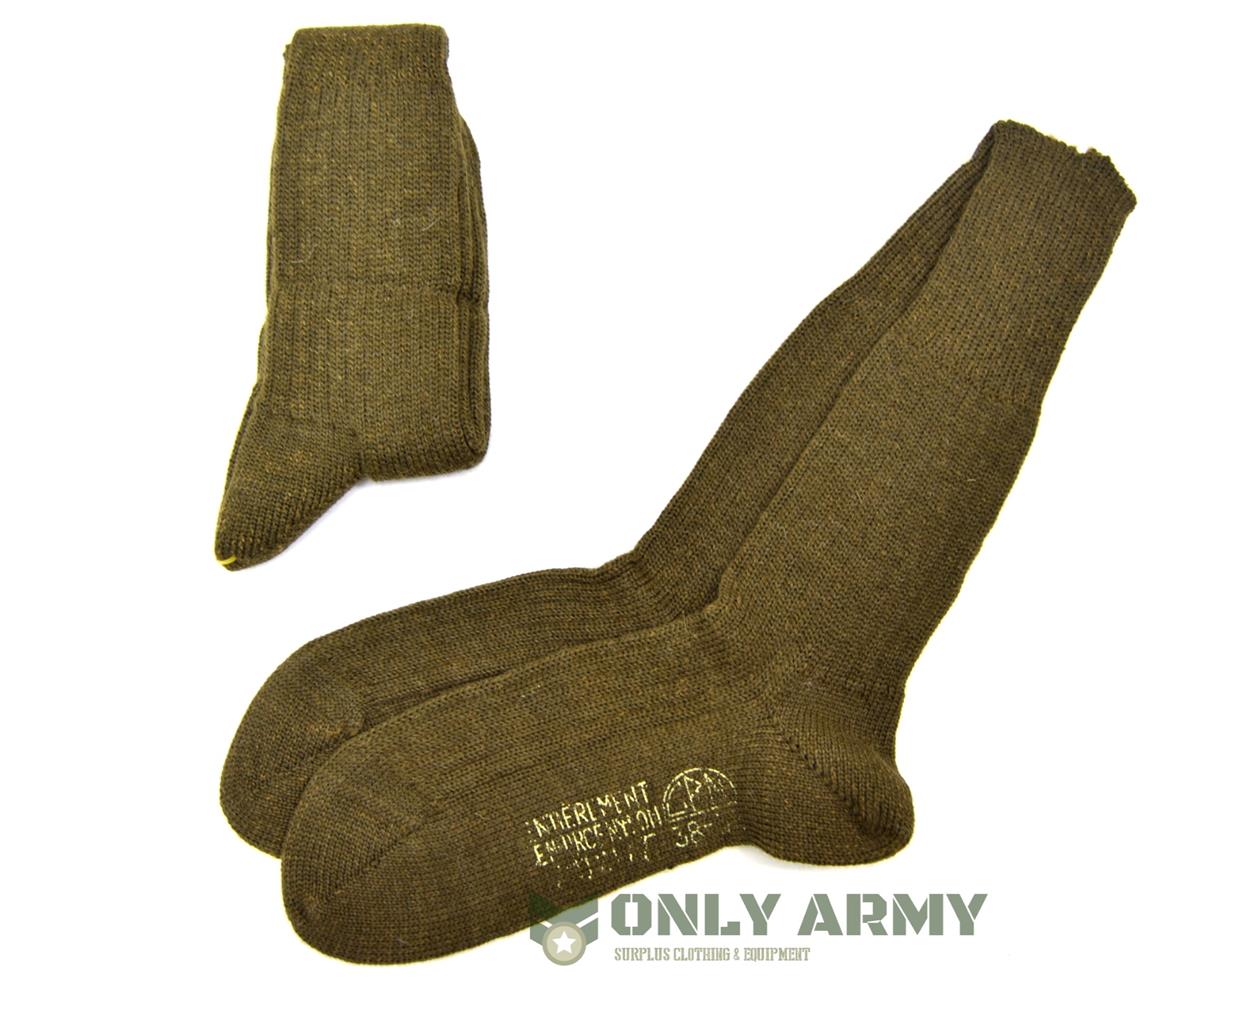 French Army Wool / Nylon Blend Socks NEW Boot Sock Thick Warm Winter ...